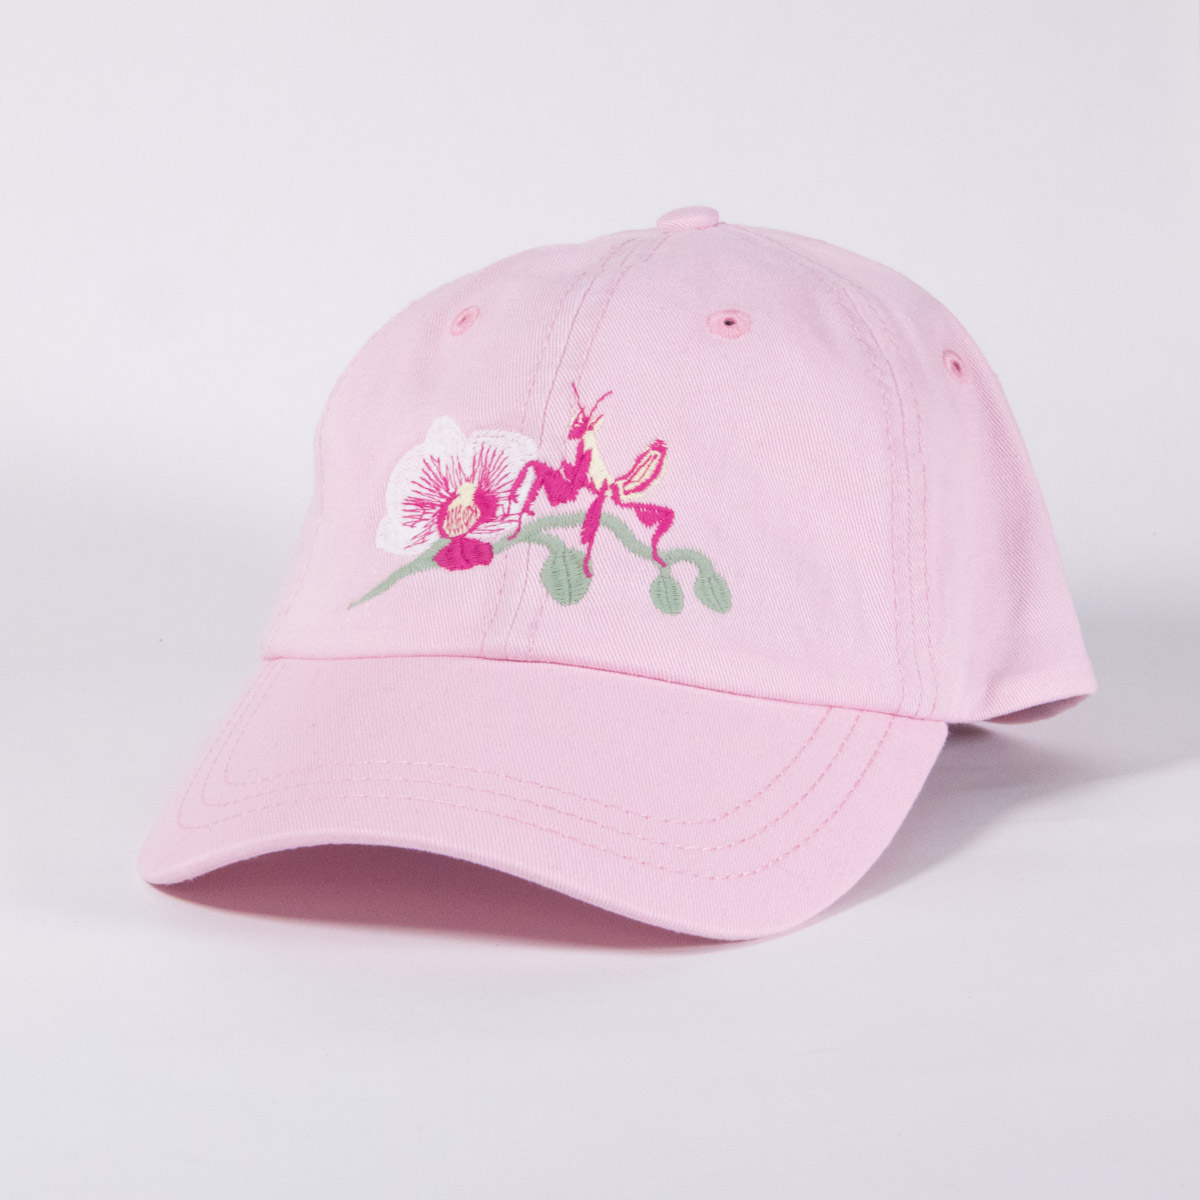 Orchid Mantis Hat - Crewel and Unusual